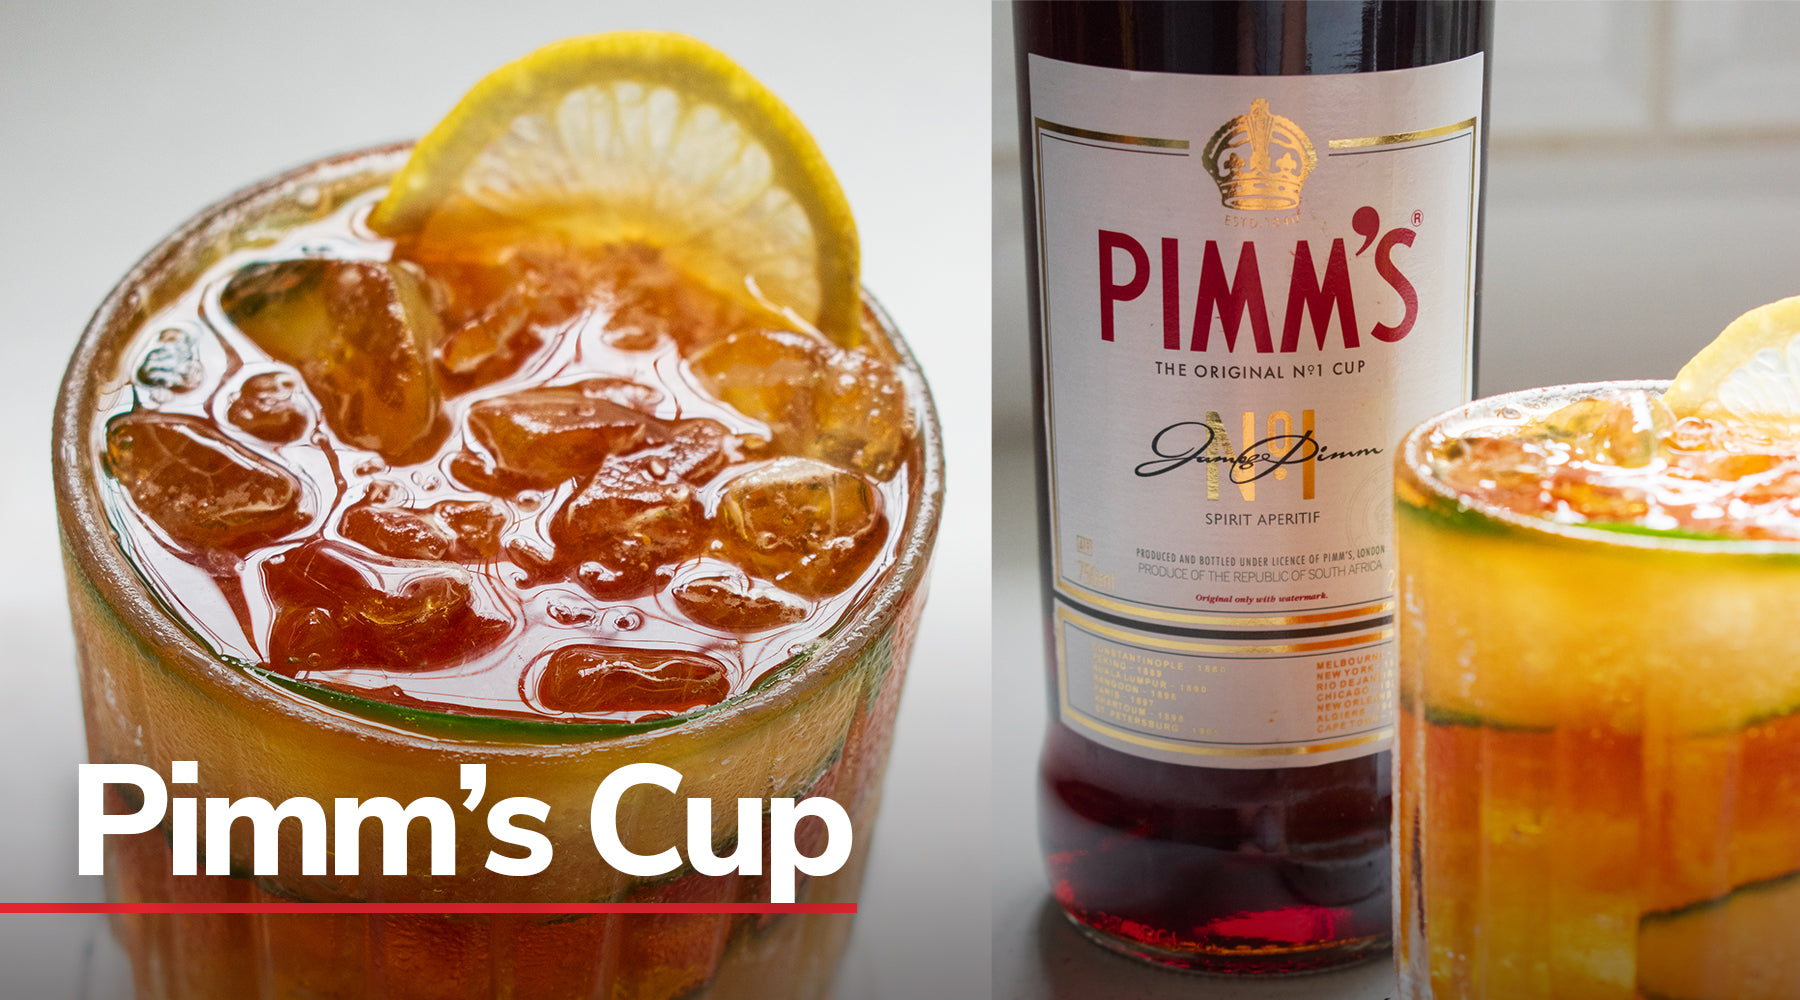 The Classic Pimm’s Cup